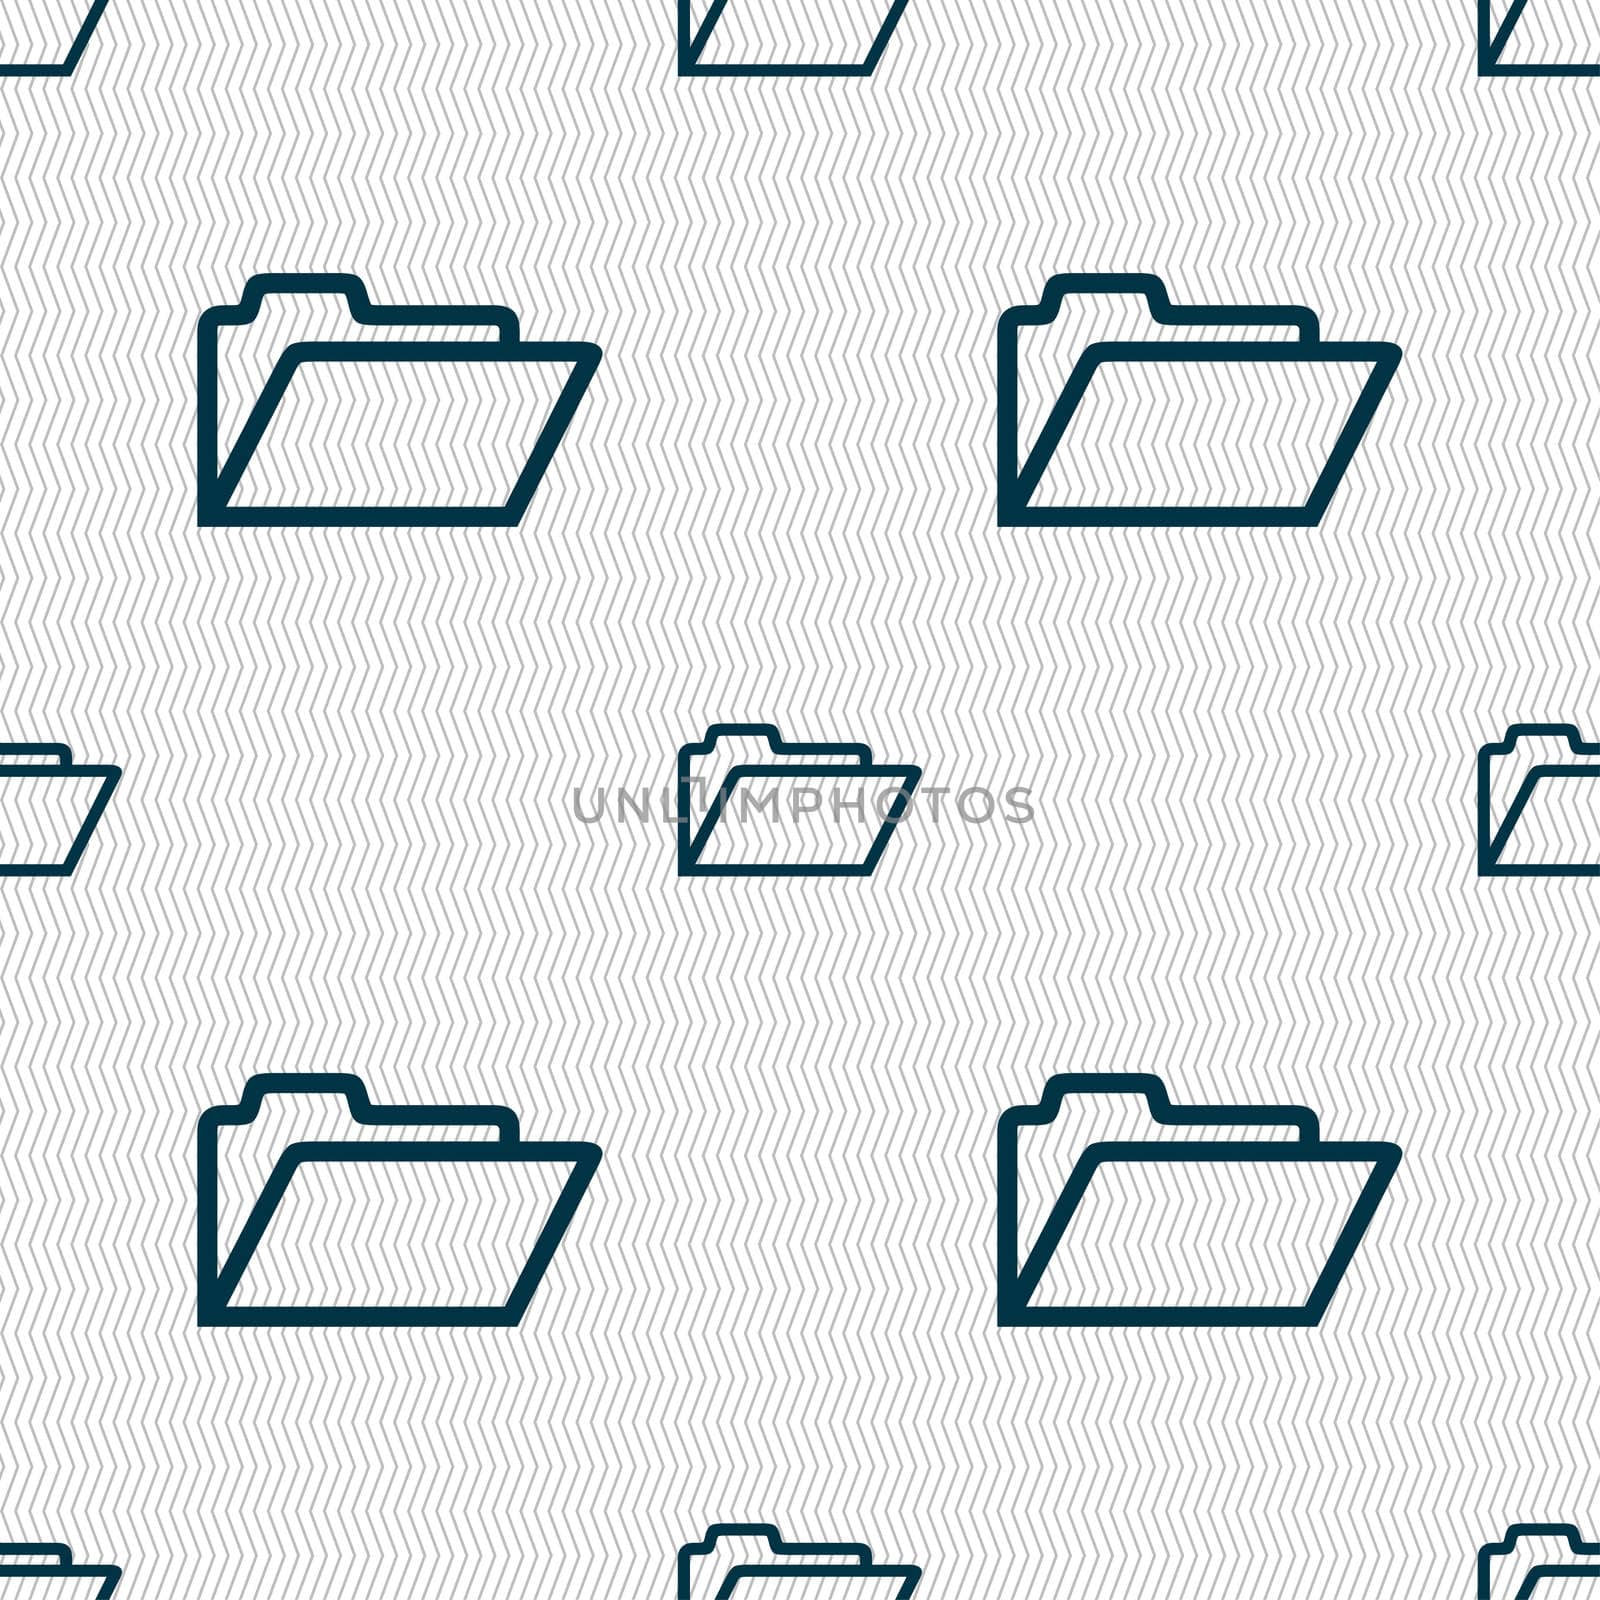 Folder icon sign. Seamless pattern with geometric texture. illustration